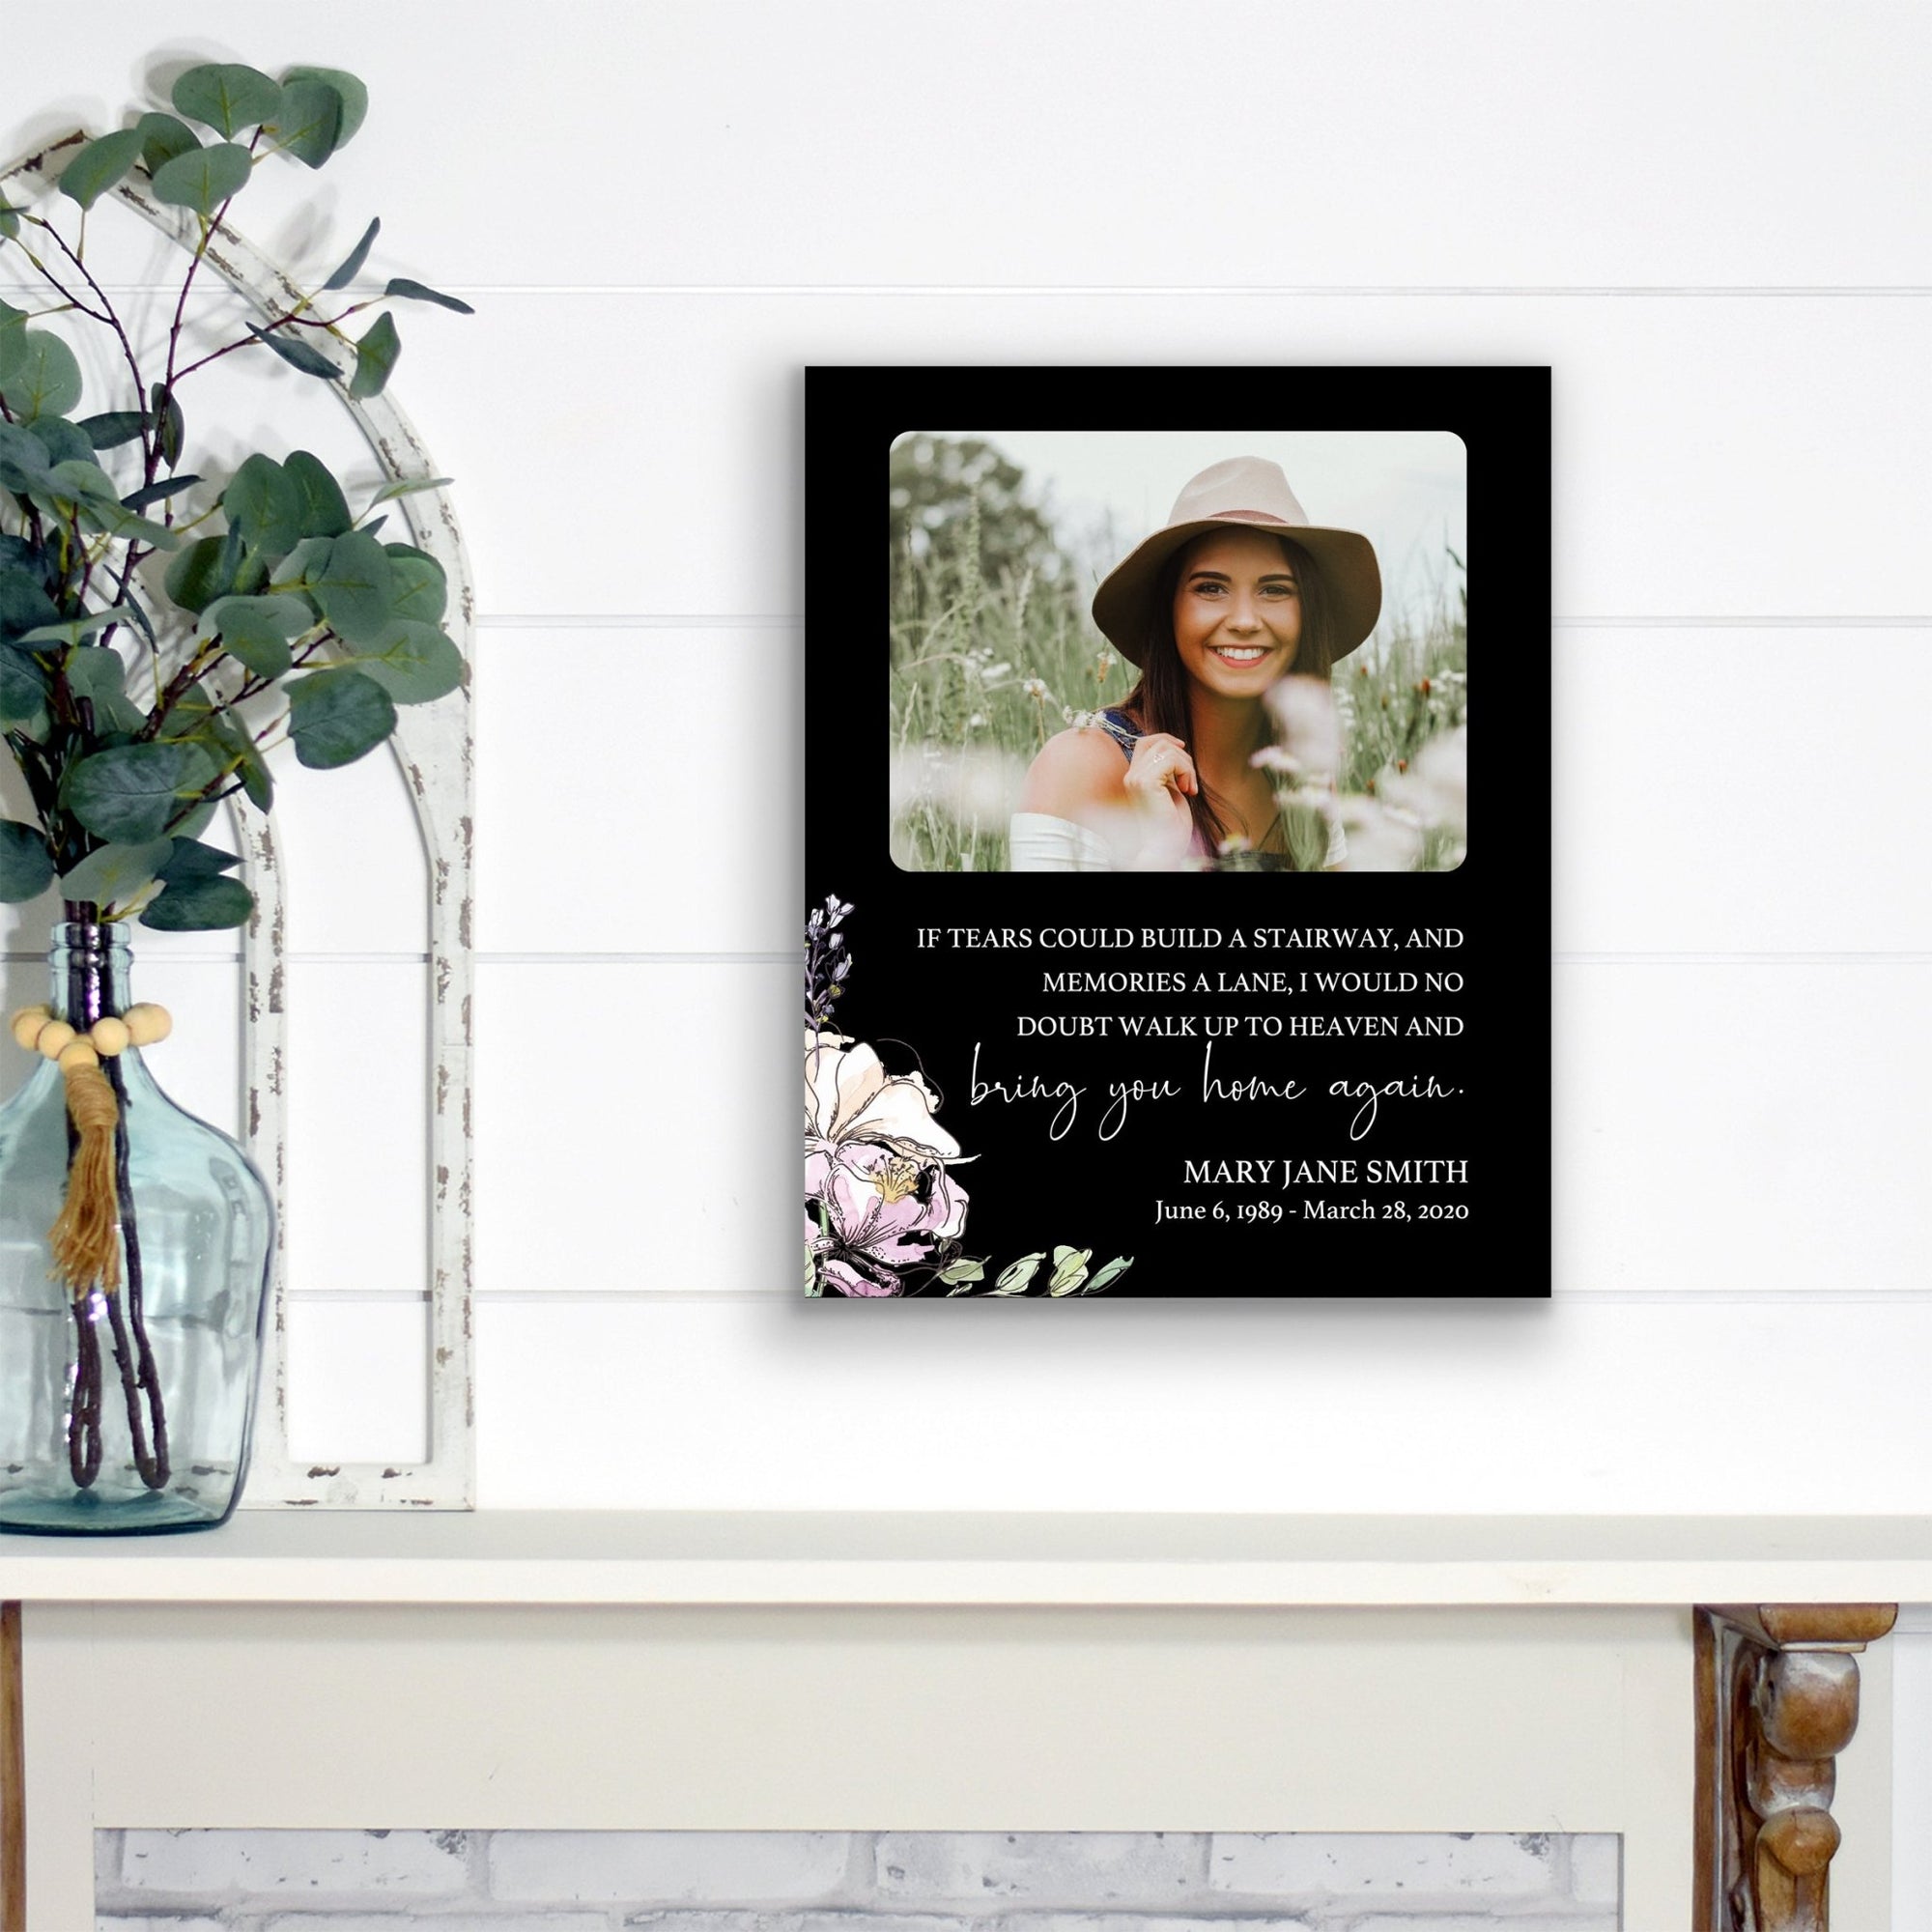 Personalized Human Memorial Black Photo & Inspirational Verse Bereavement Wall Décor & Sympathy Gift Ideas - If Tears Could - LifeSong Milestones